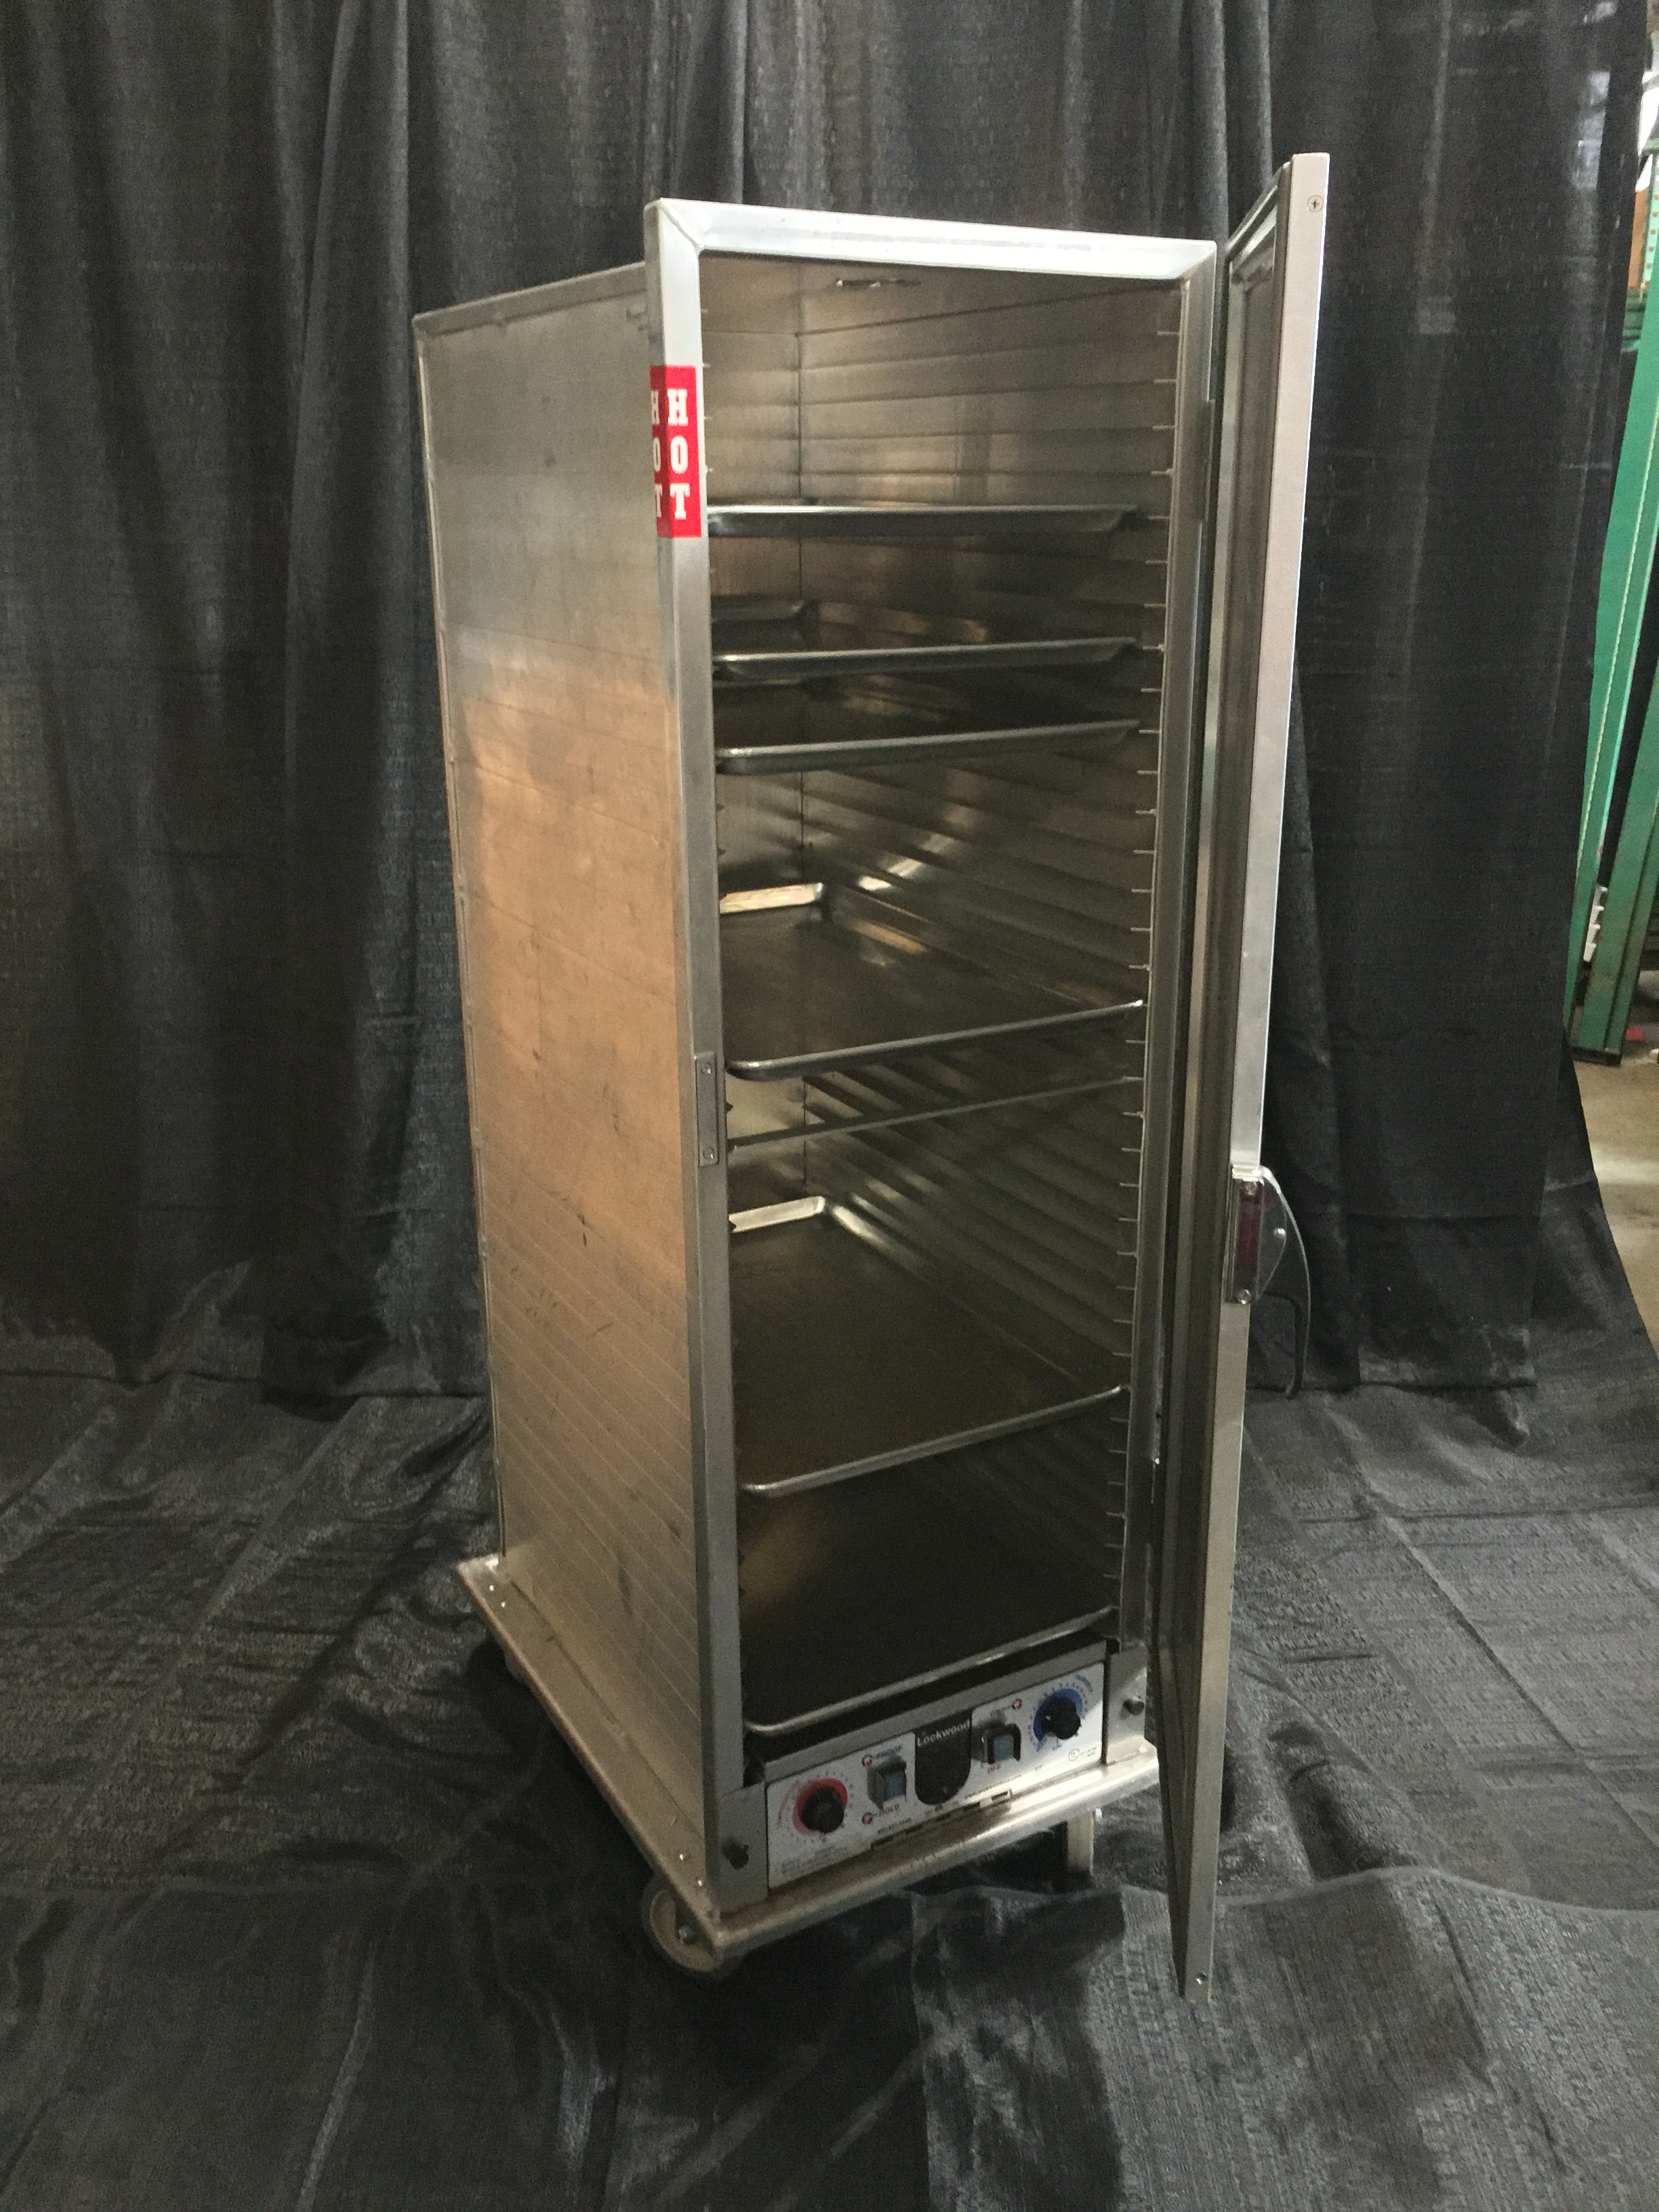 5 Electric Food Holding Cabinet 85 00 Chaps Party Rental